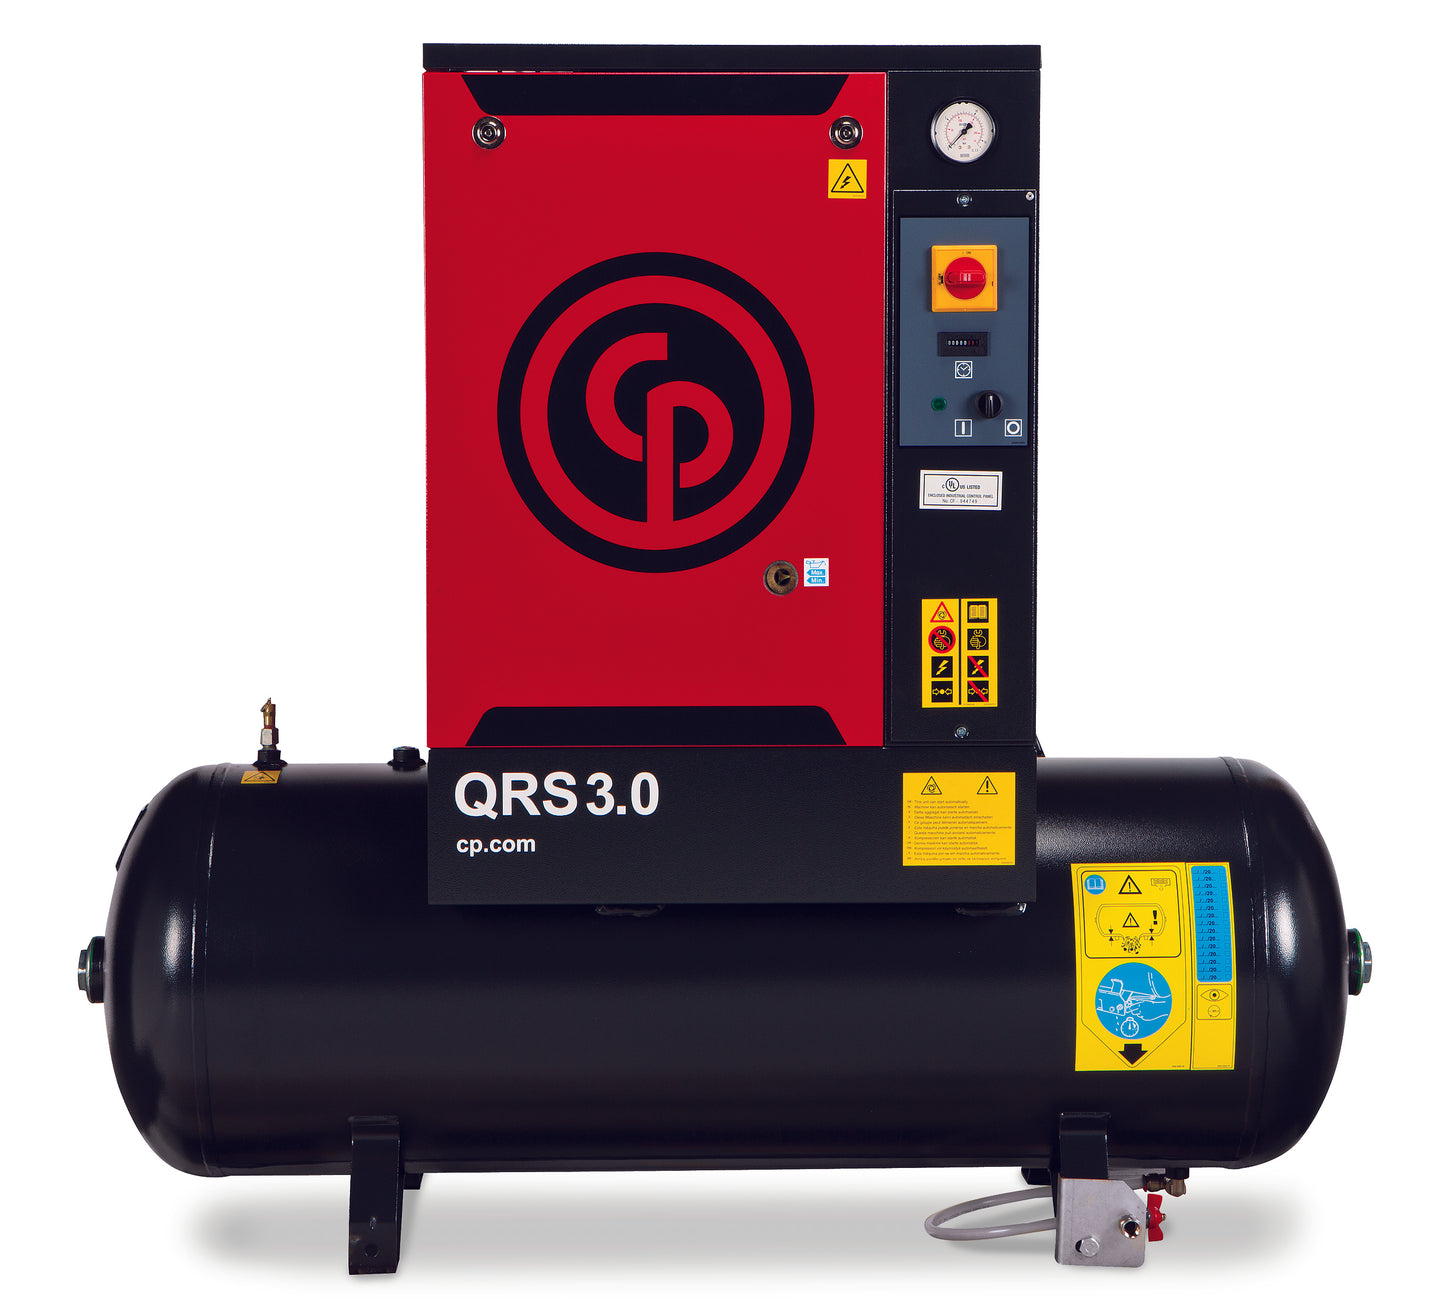 Chicago Pneumatic QRS 3.0 HP Tank Mount Rotary Screw Air Compressor | 9.8 CFM@145 PSI, 208-230/460 Volt, 3-Phase | 4152054771